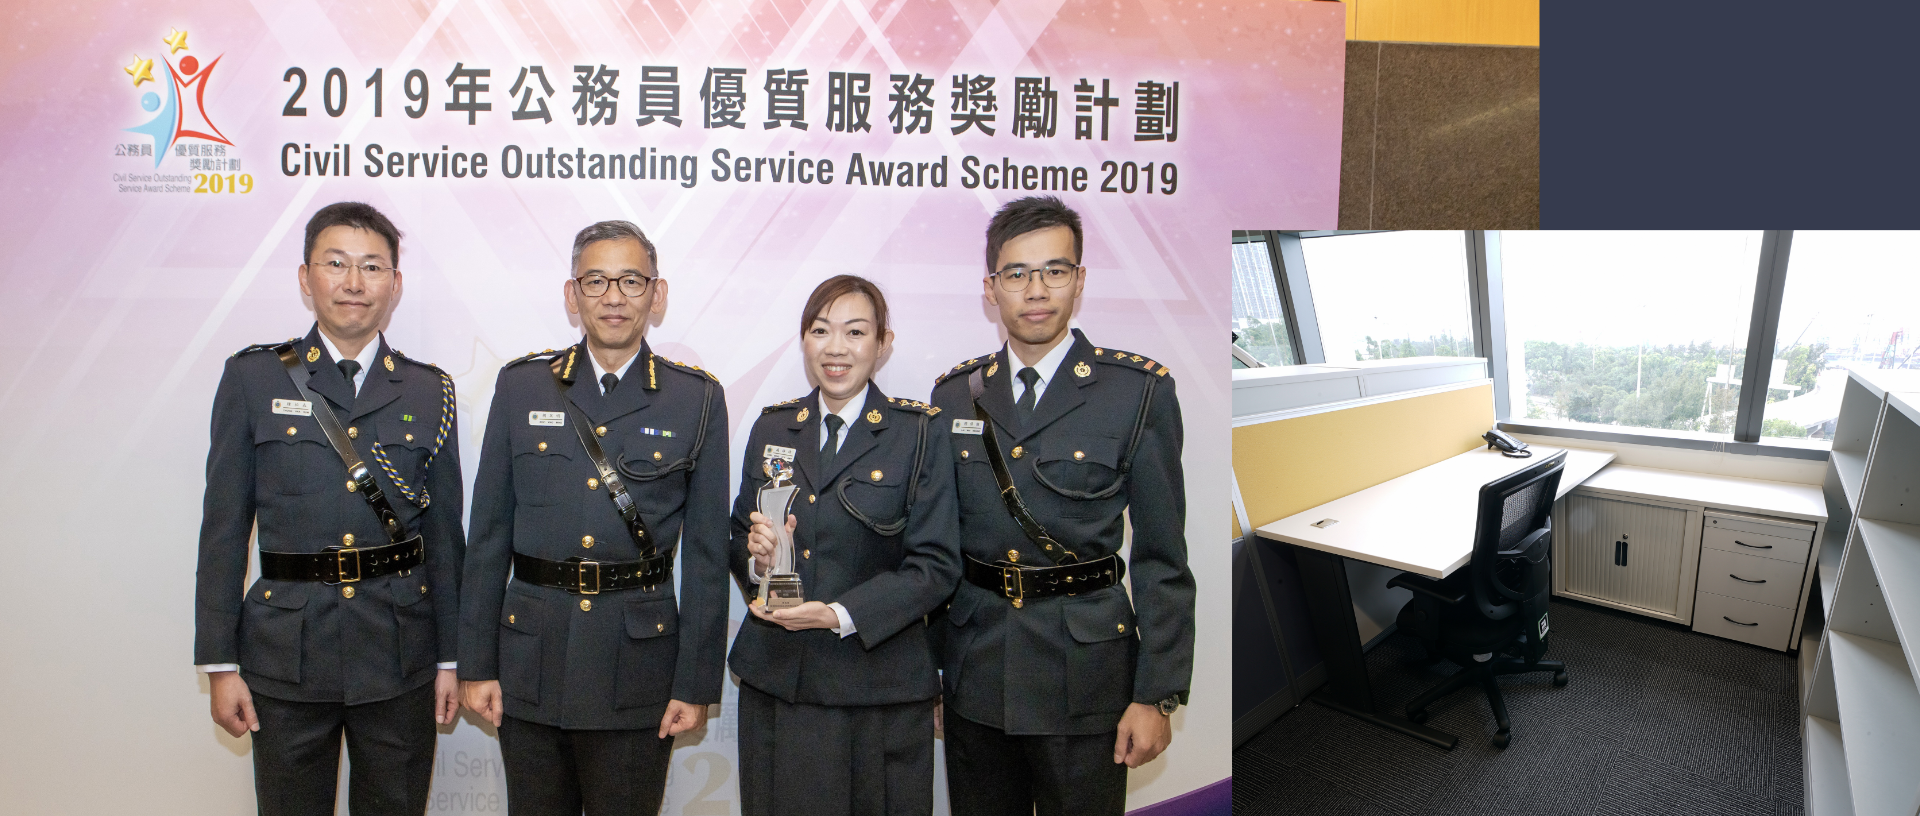 Our “Development and Production of Modernised Government Office Furniture” project won the Silver Prize of the Team Award (Internal Support) under the Civil Service Outstanding Service Award Scheme 2019.